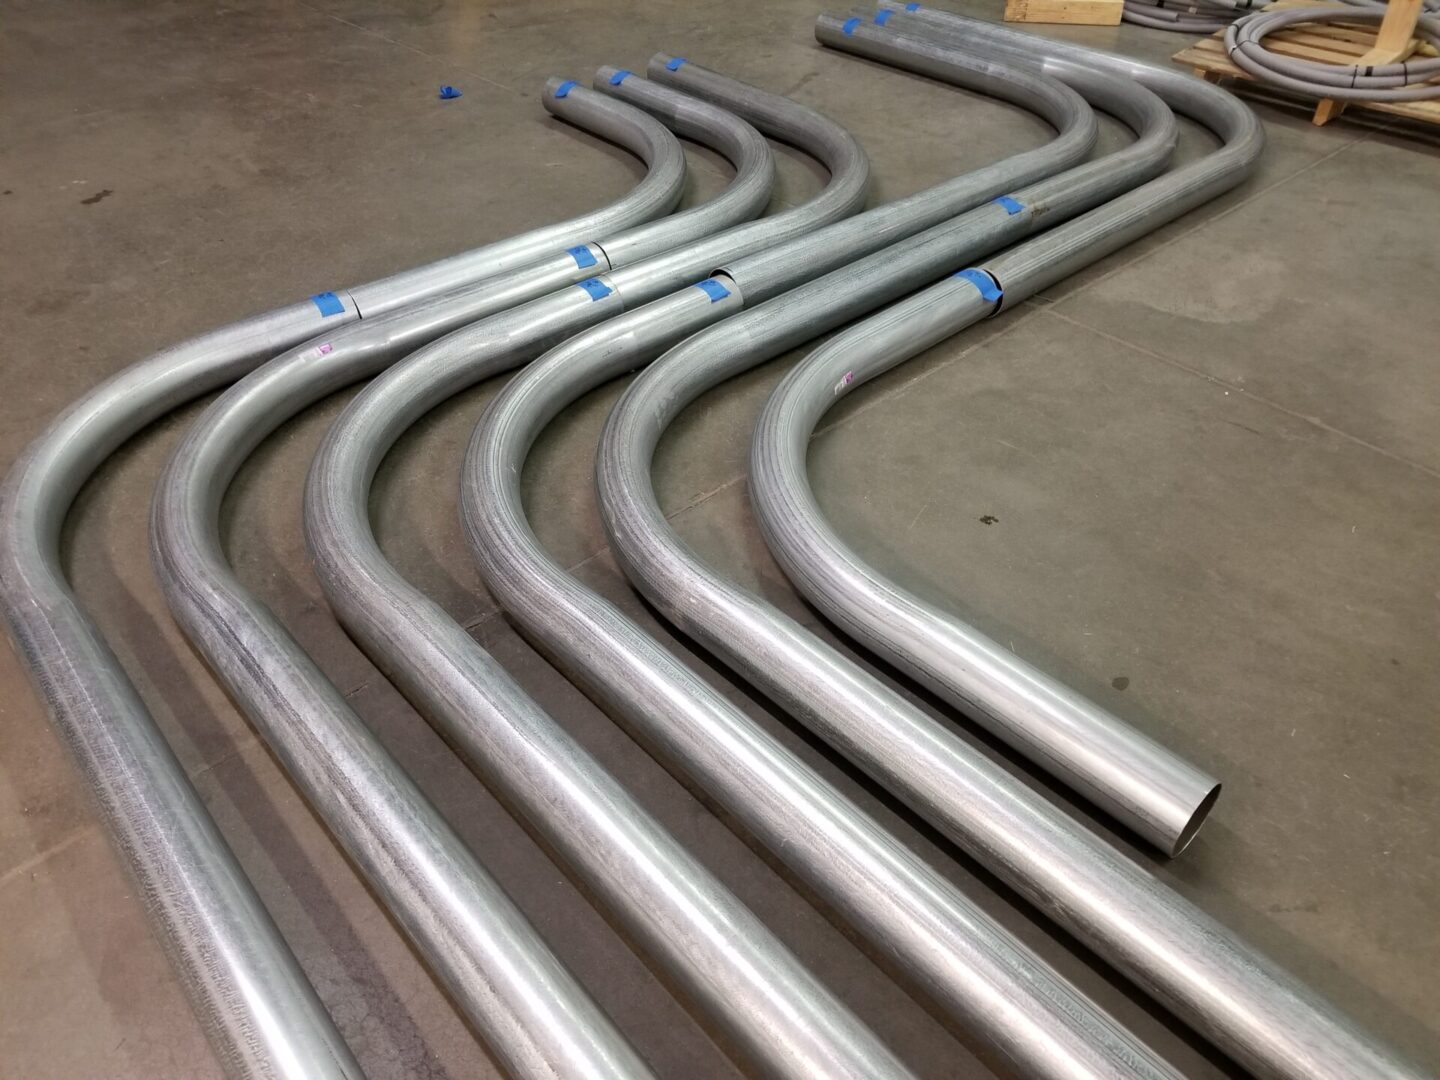 Curved metal pipes